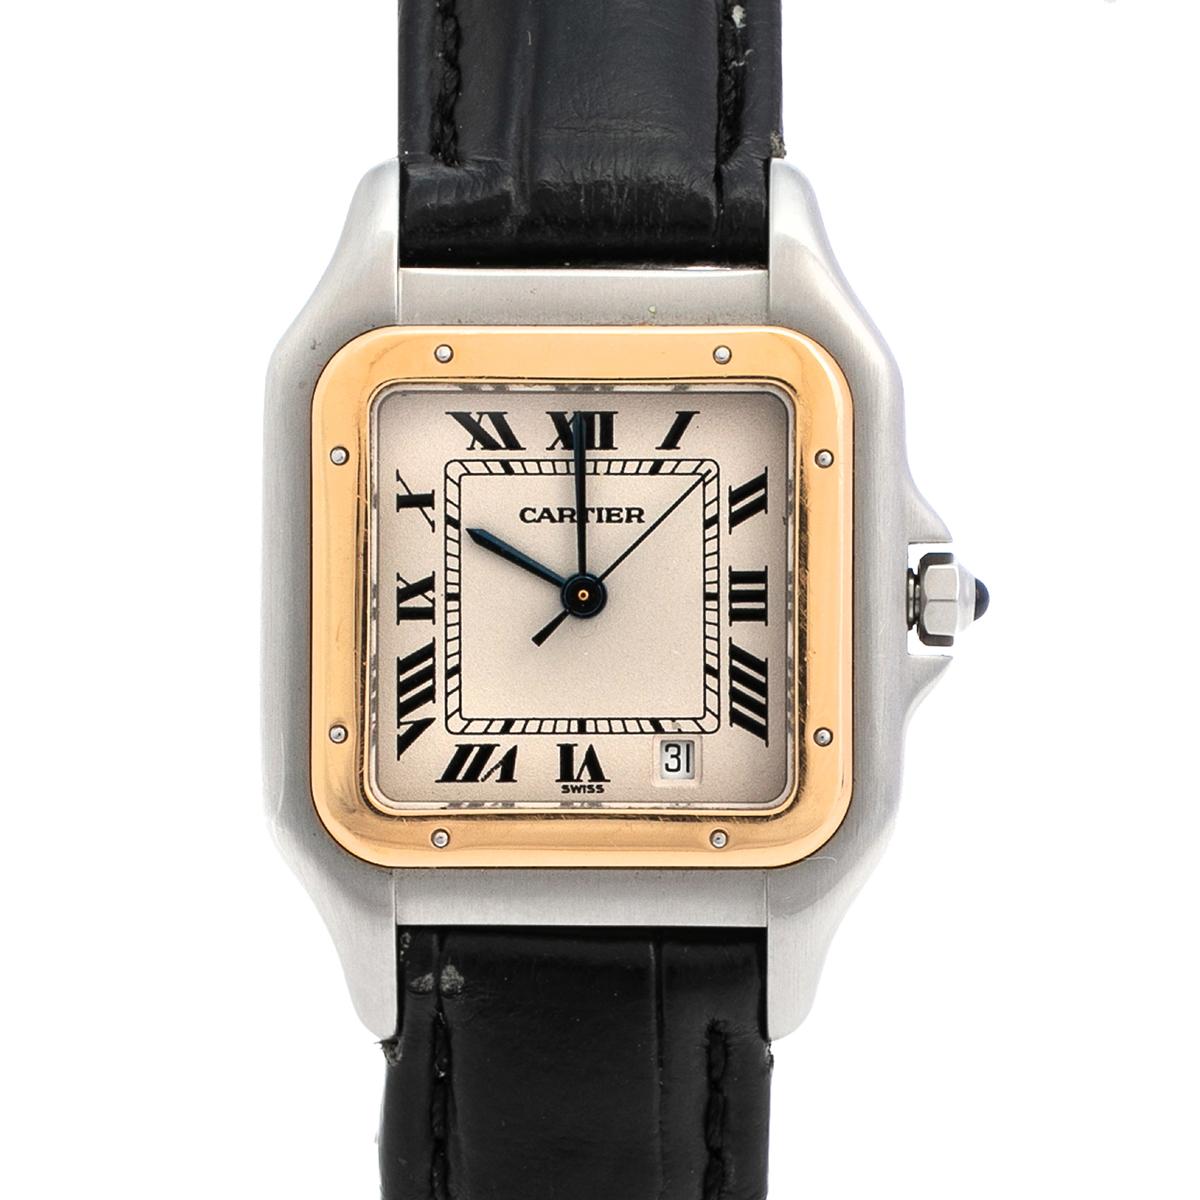 An icon from Cartier, this Panthère de Cartier Quartz watch for women is cast in stainless steel and 18k yellow gold. It has a dial set with Roman numeral hour markers, three hands in blue, and a date window at V. The crown is set with a synthetic